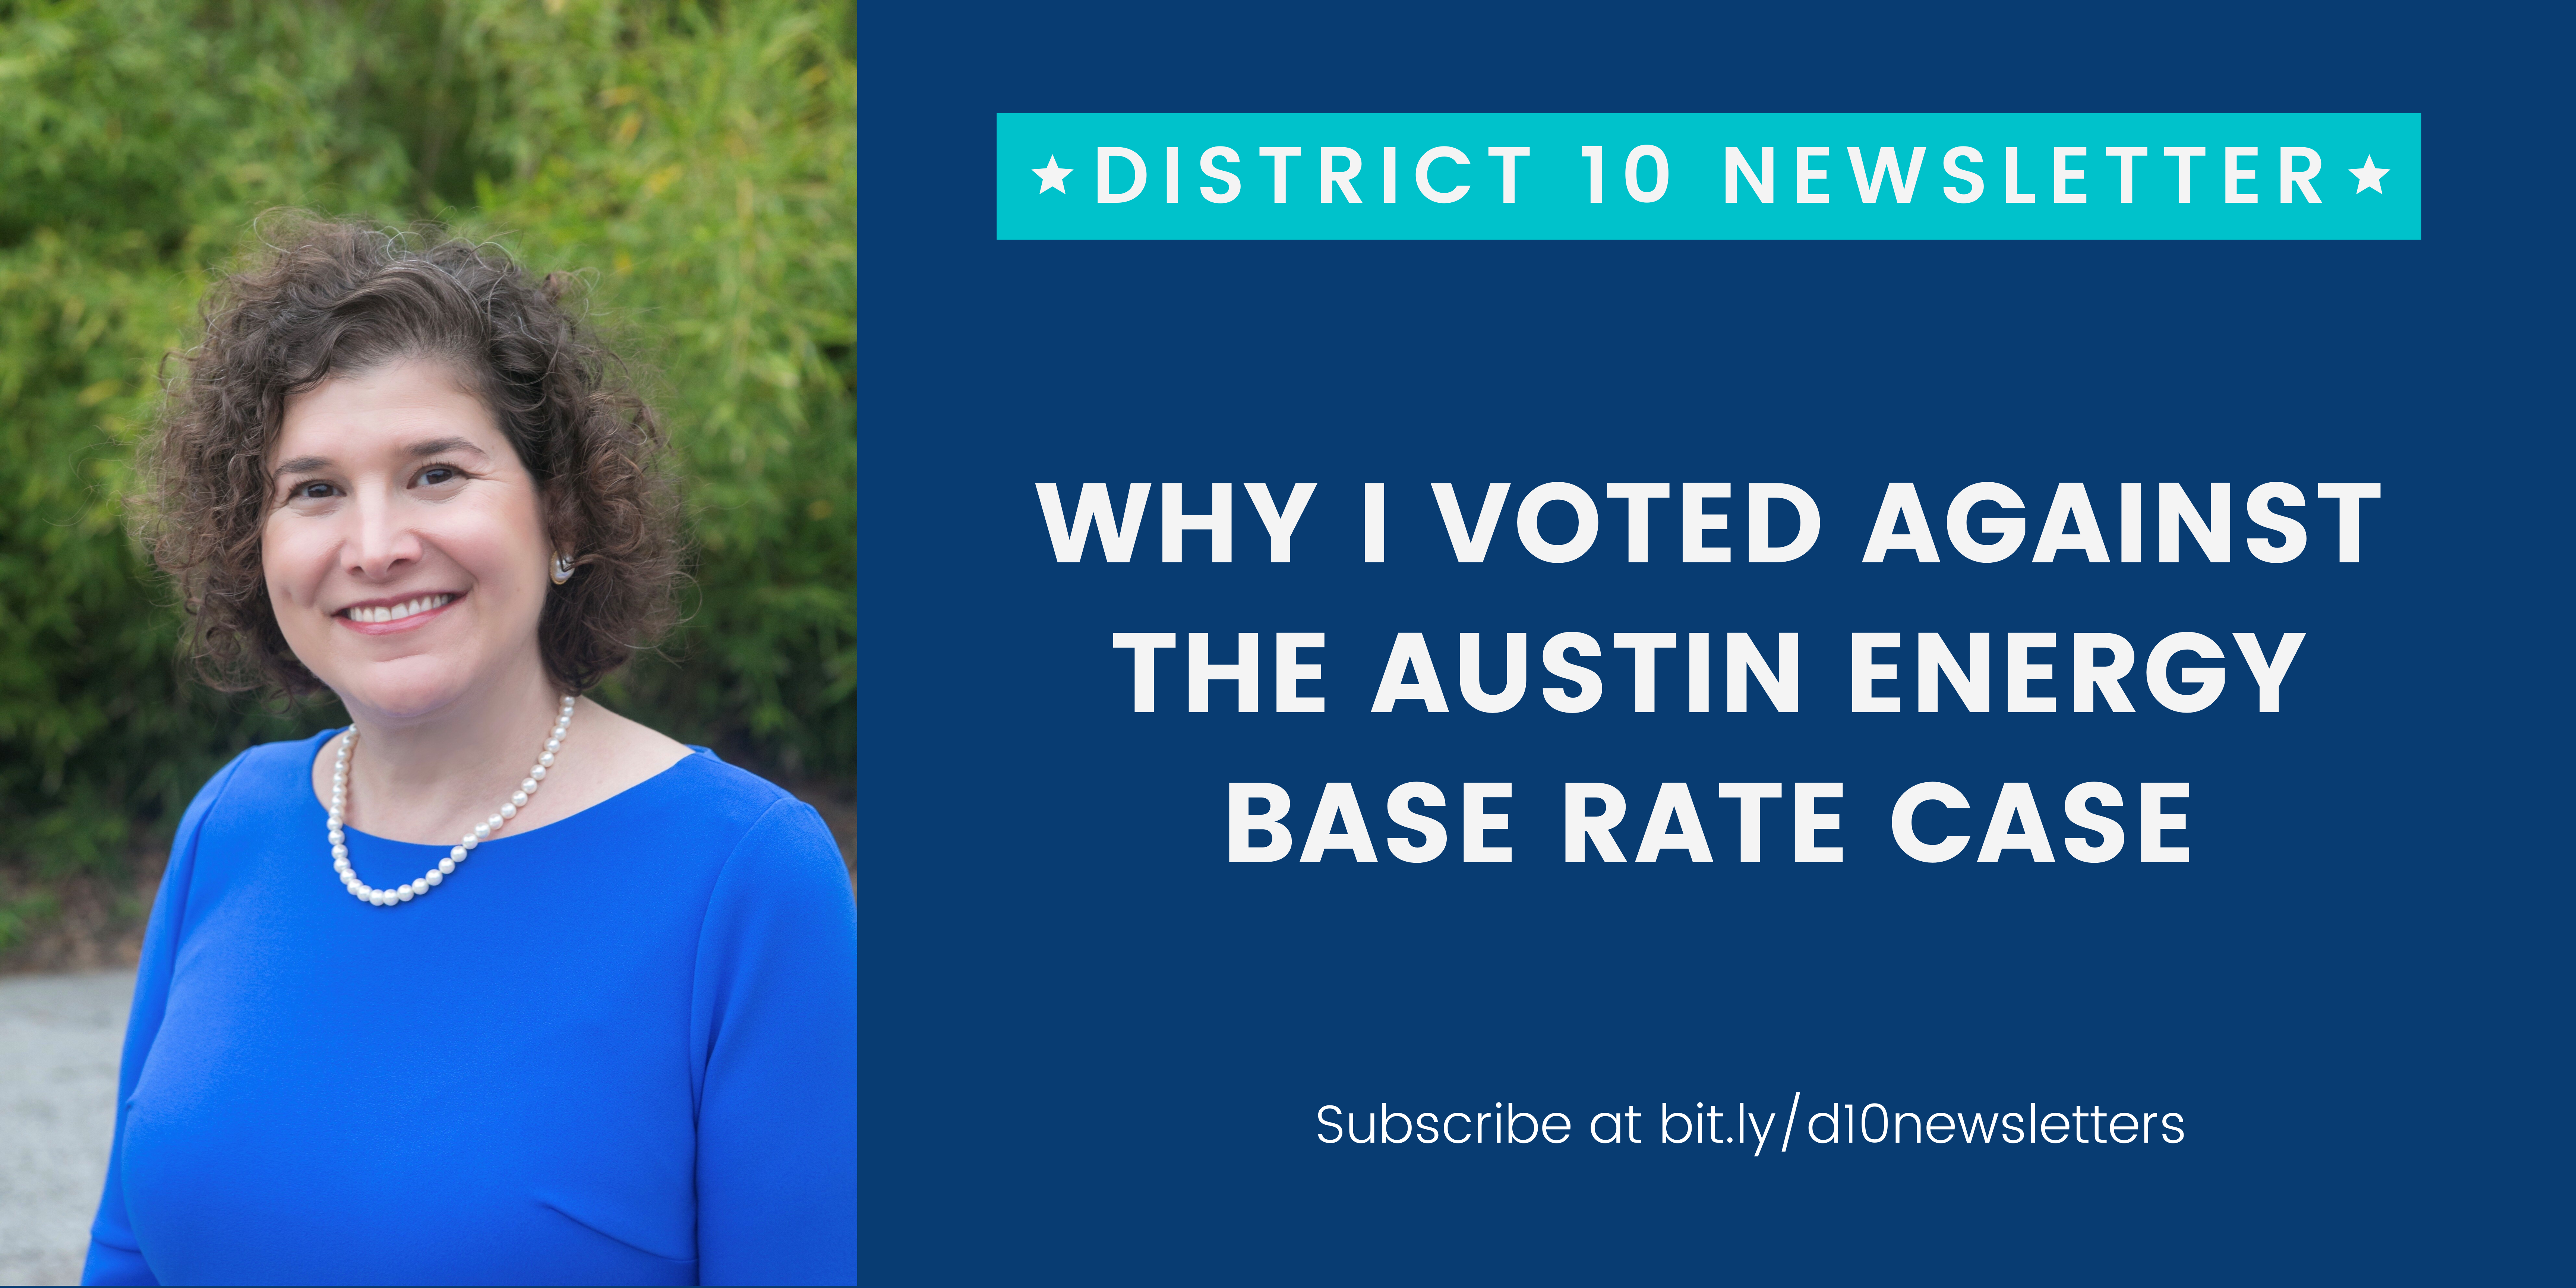 Why I Voted Against the Austin Energy Base Rate Case